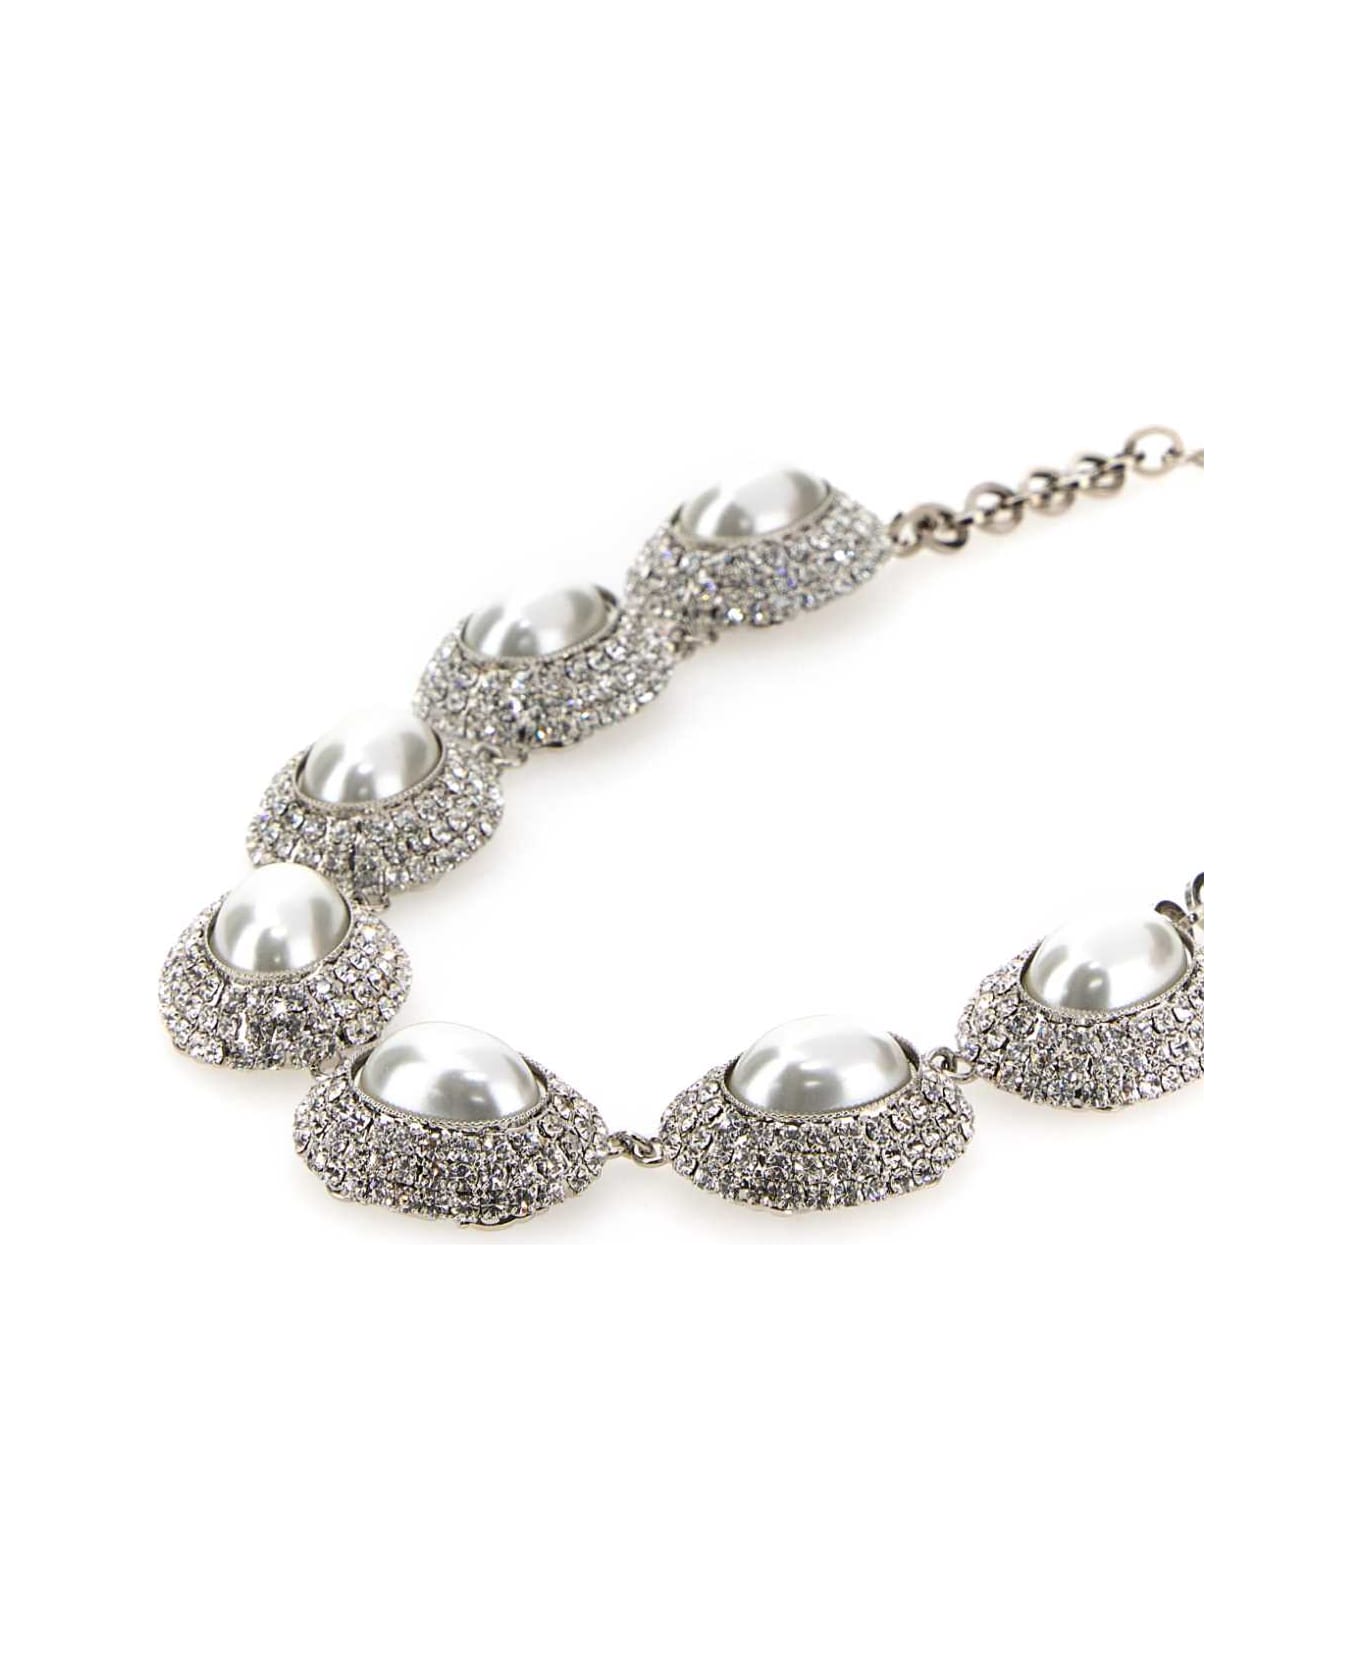 Alessandra Rich Embellished Metal Necklace - CRYSILVER ネックレス